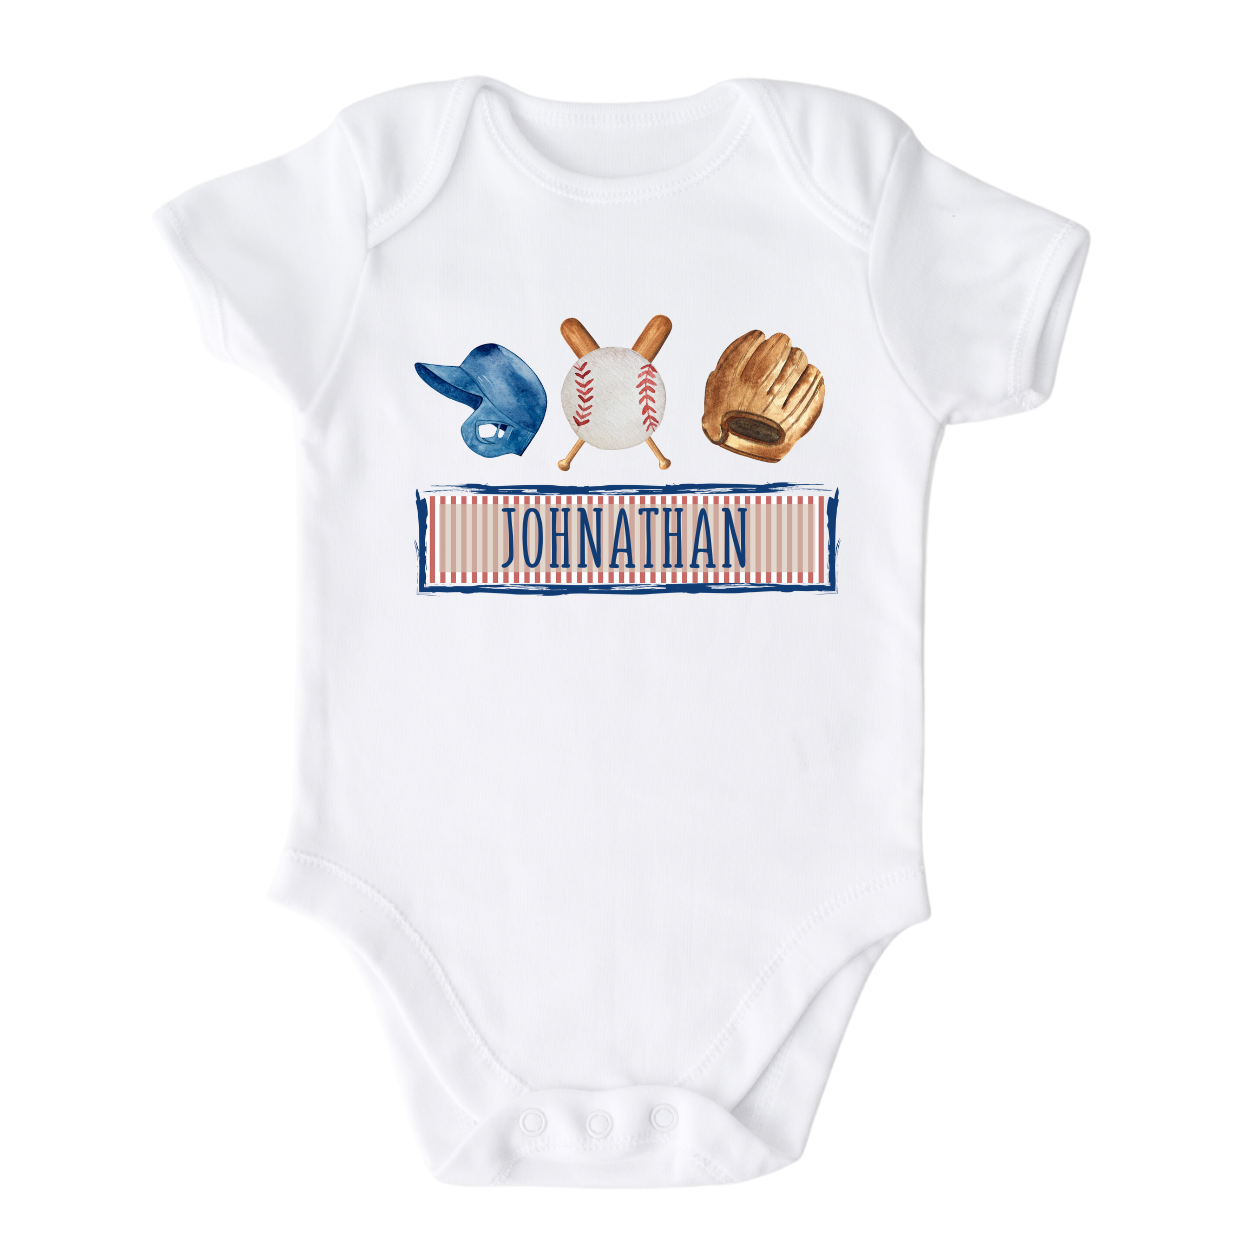 Baby Onesie with a cute printed design of baseball theme, customizable with a name option.